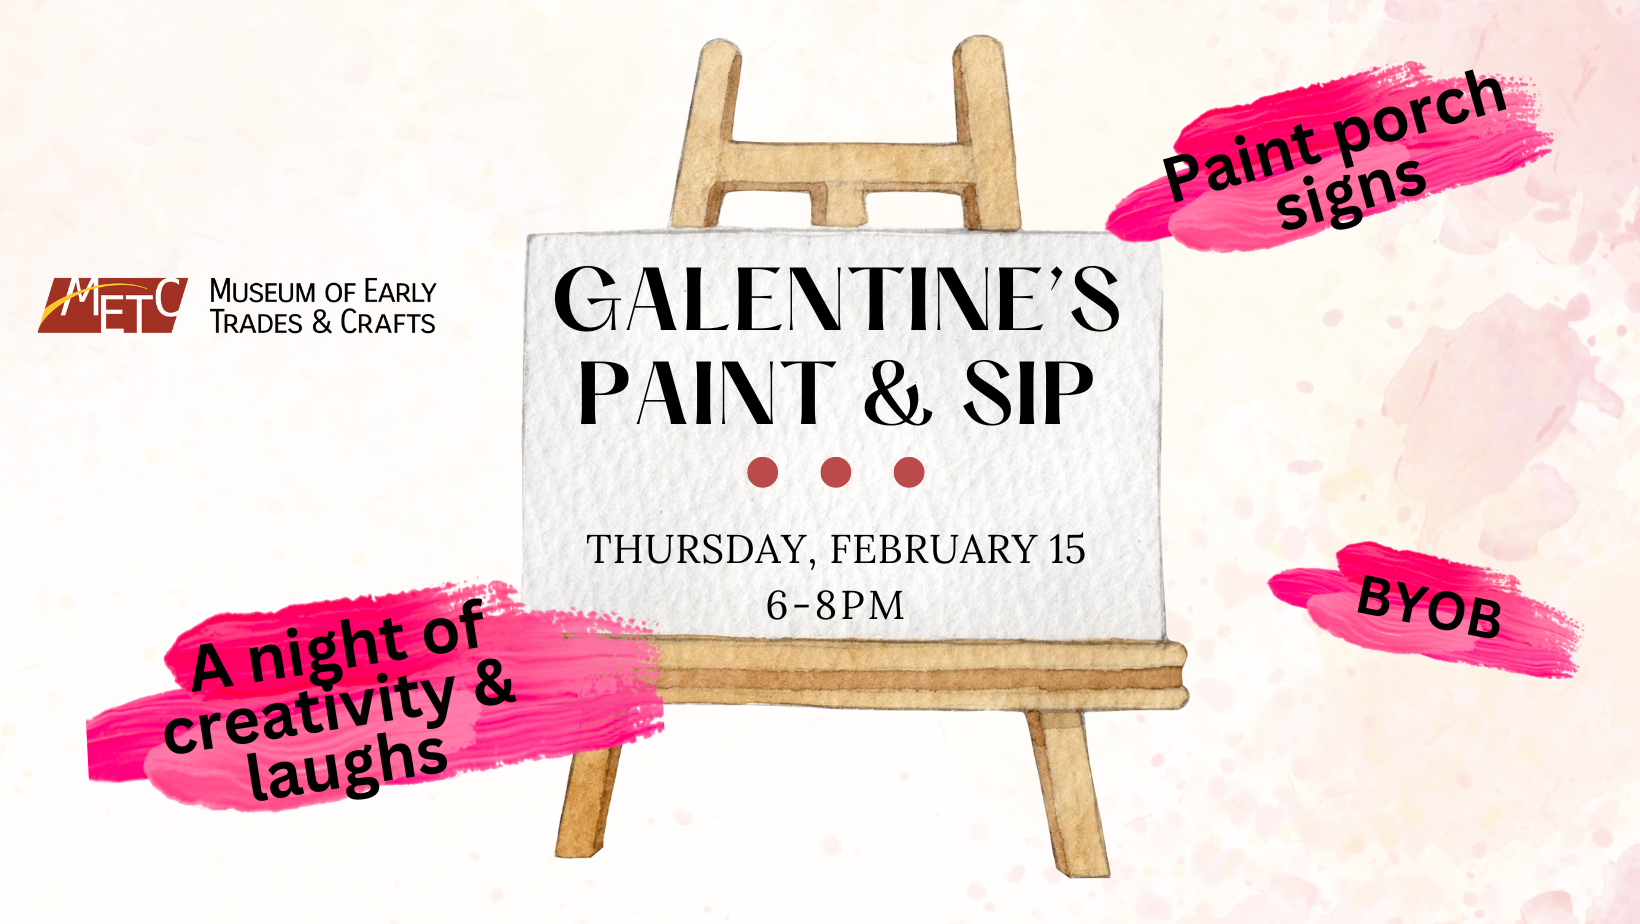 Galentine's Paint and Sip